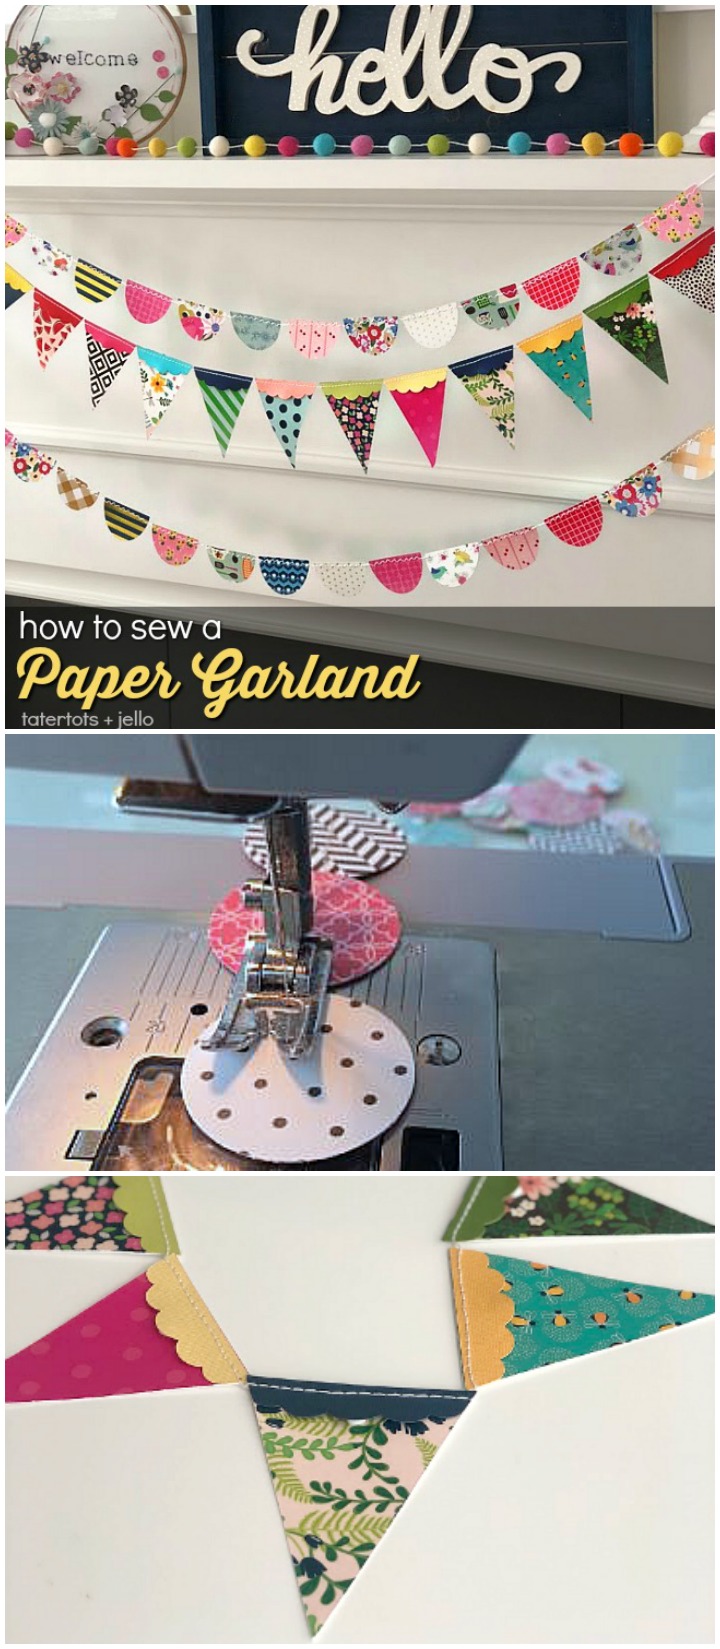 How to sew a paper garland. It's an easy way to decorate for ANY occasion. In just minutes you can have the perfect compliment to your decor or occasion! 